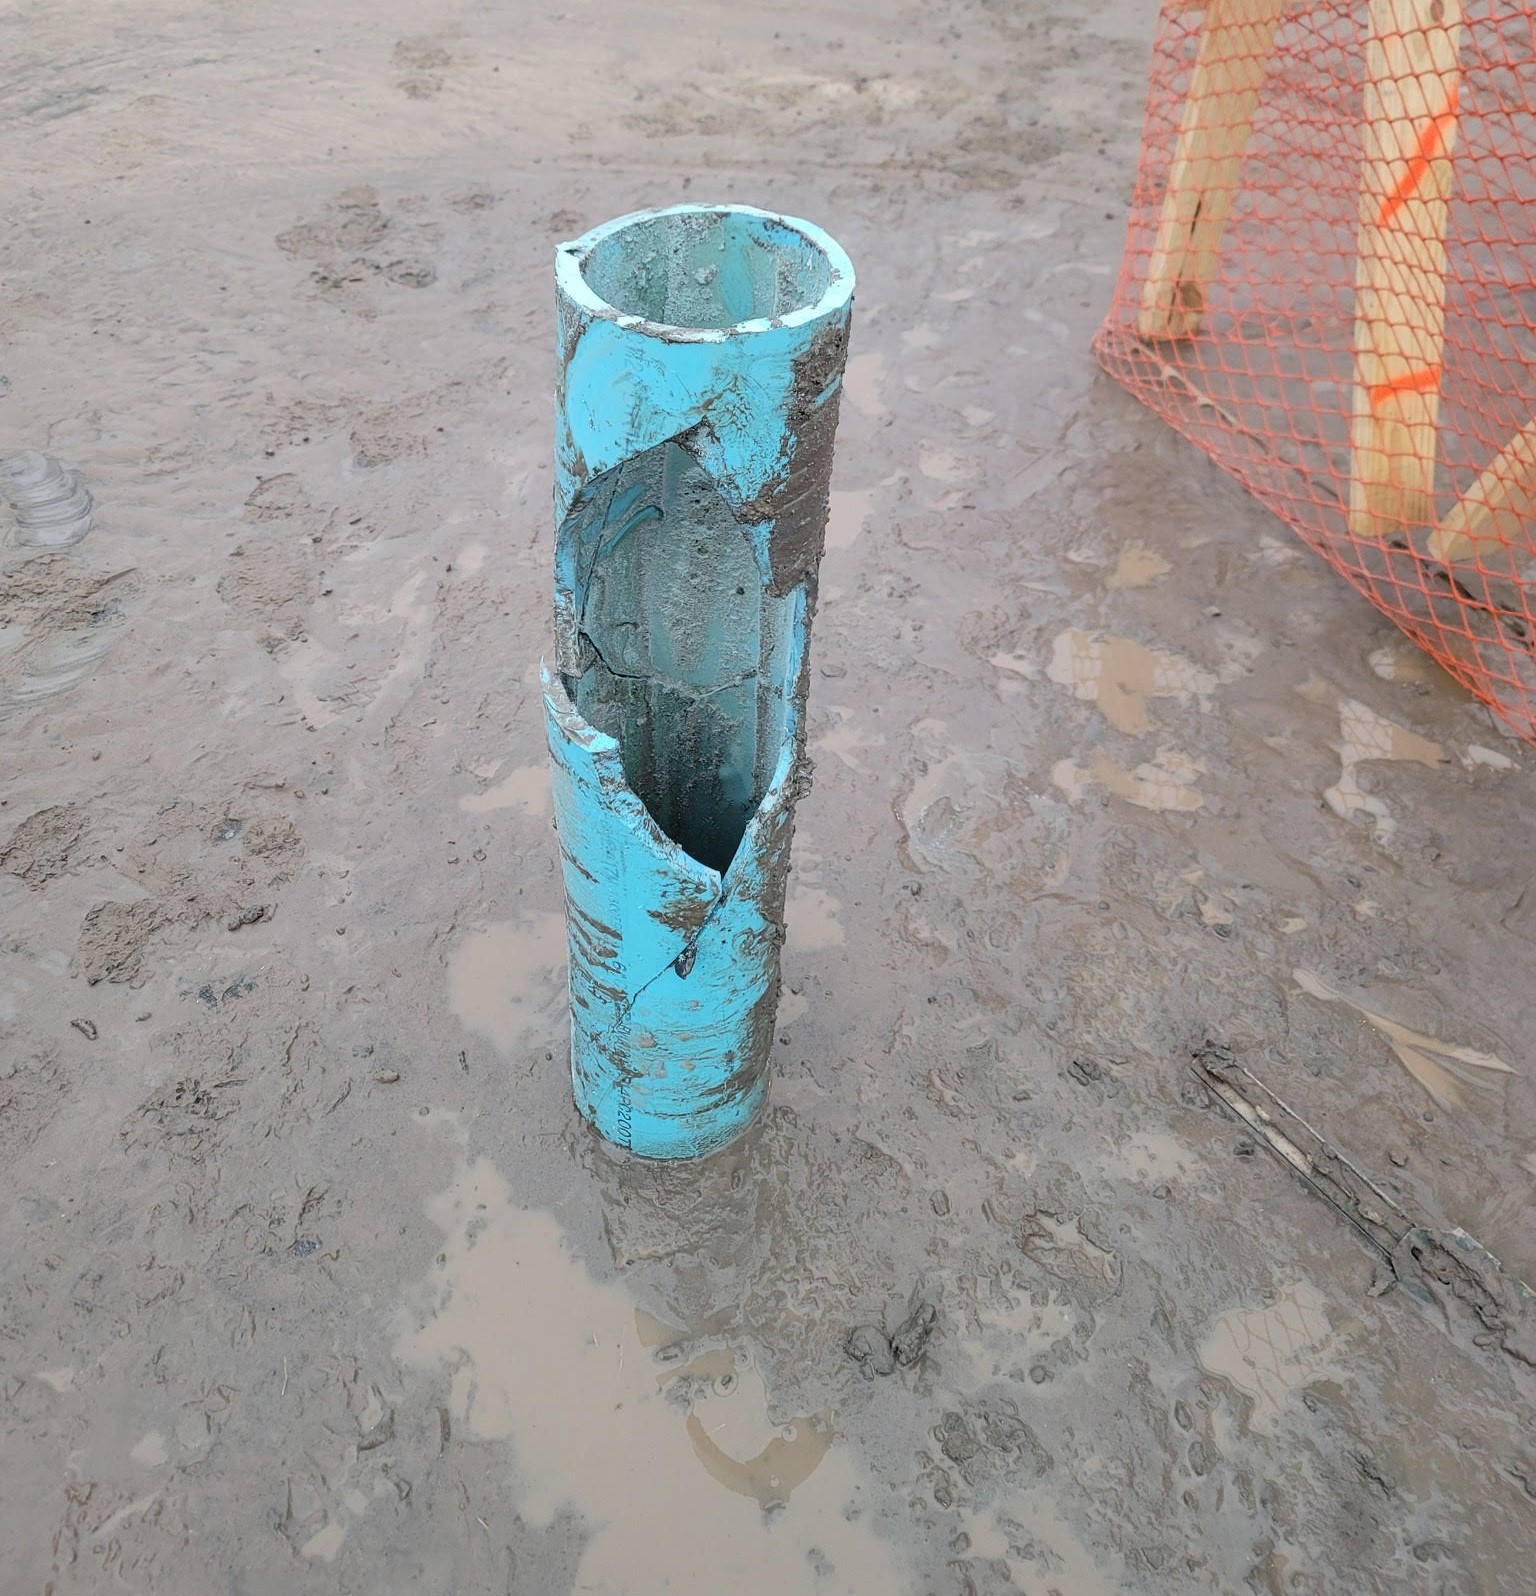 Impacted section of PVC water line